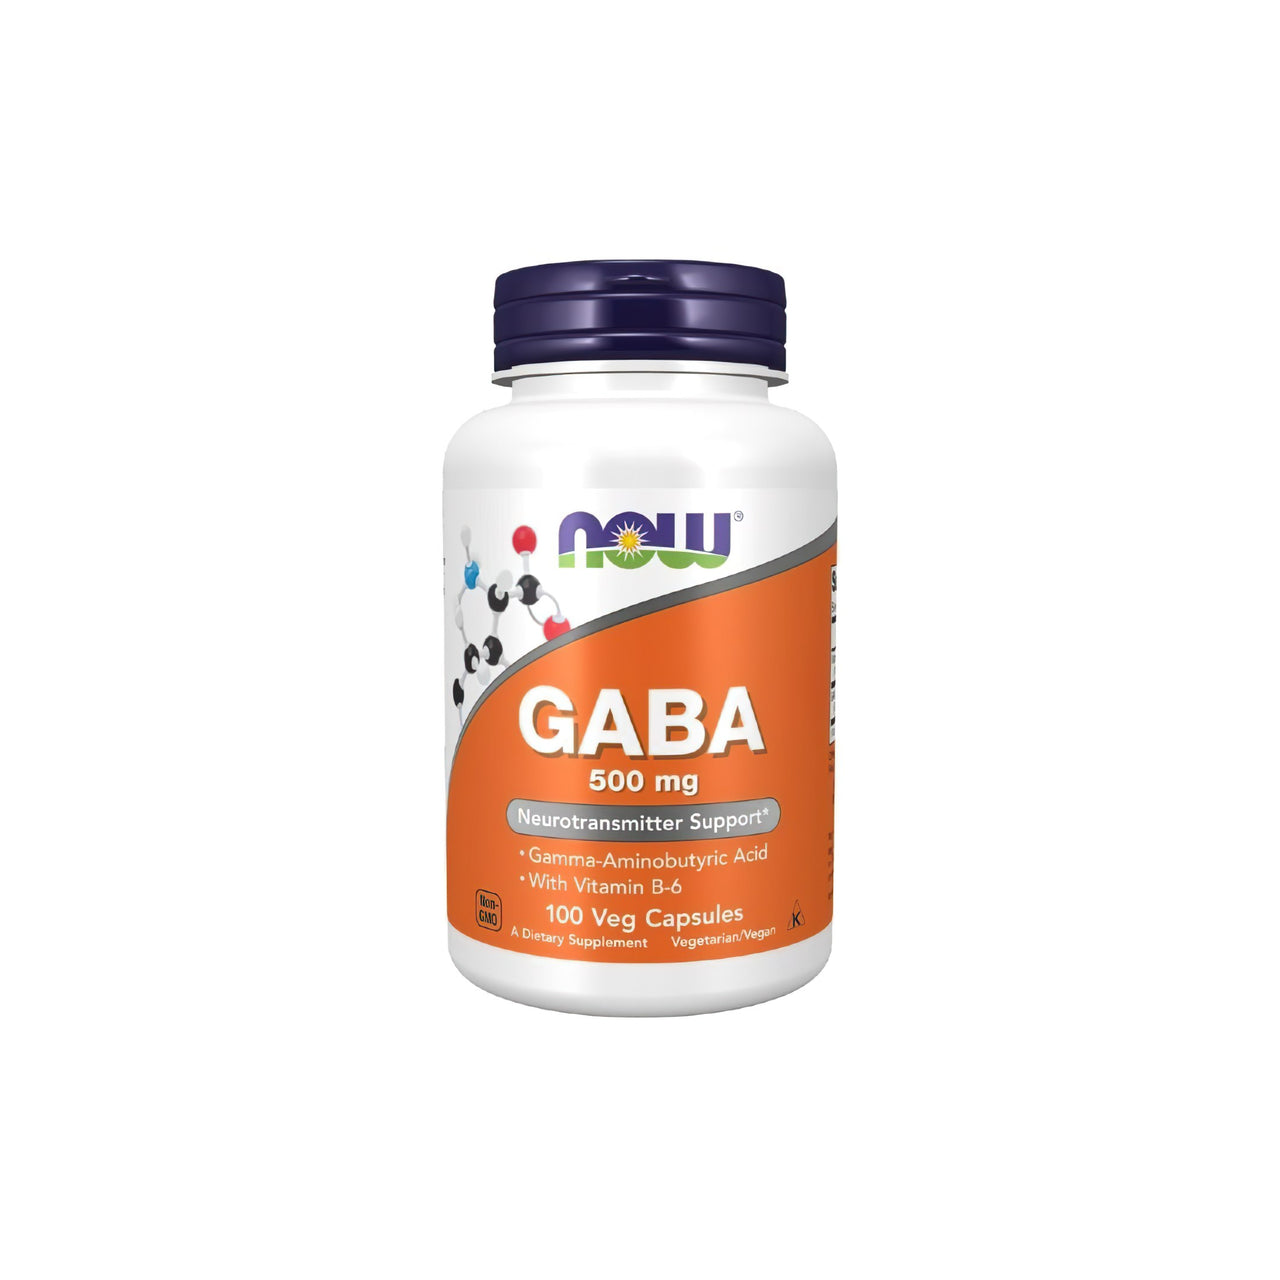 A bottle of Now Foods GABA 500 mg 200 Vegetable Capsules, promoting relaxation and supporting the nervous system.